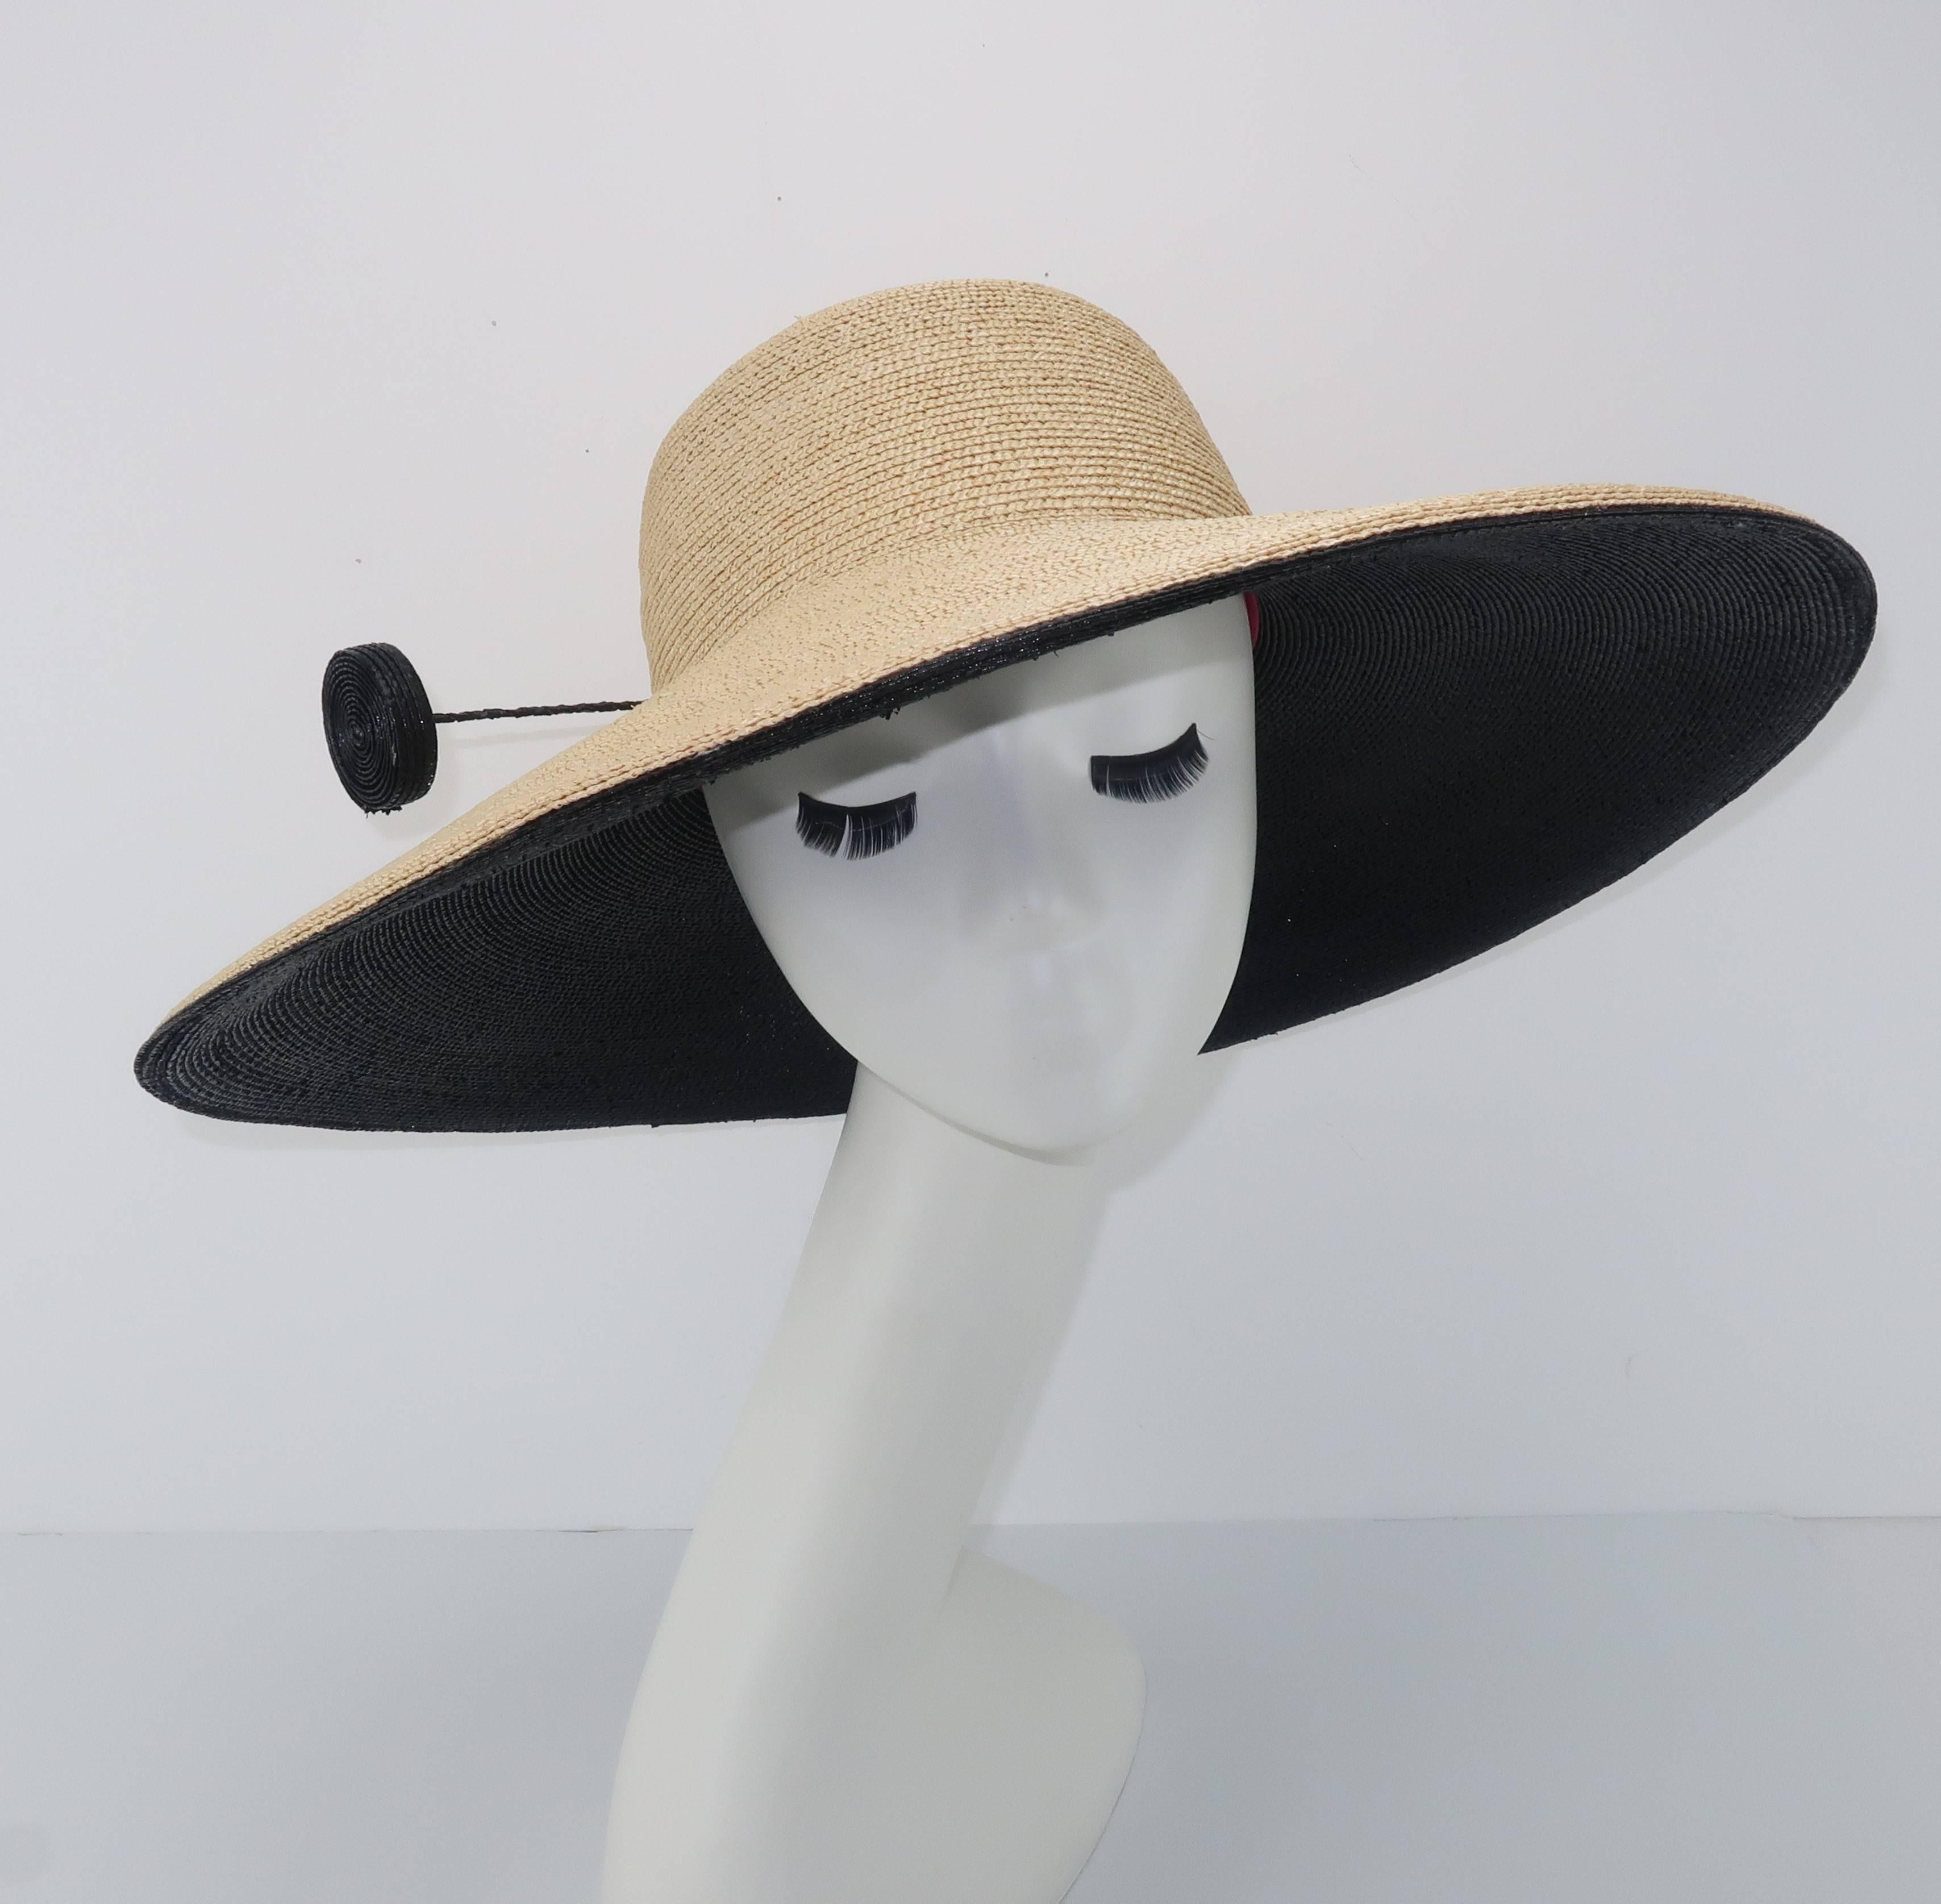 You may go incognito with this fabulously large brimmed hat by Frank Olive but you will never go unnoticed.  The ultra fashionable natural straw body of this hat is lined on the inner brim with a layer of contrasting black straw.  The graphic color